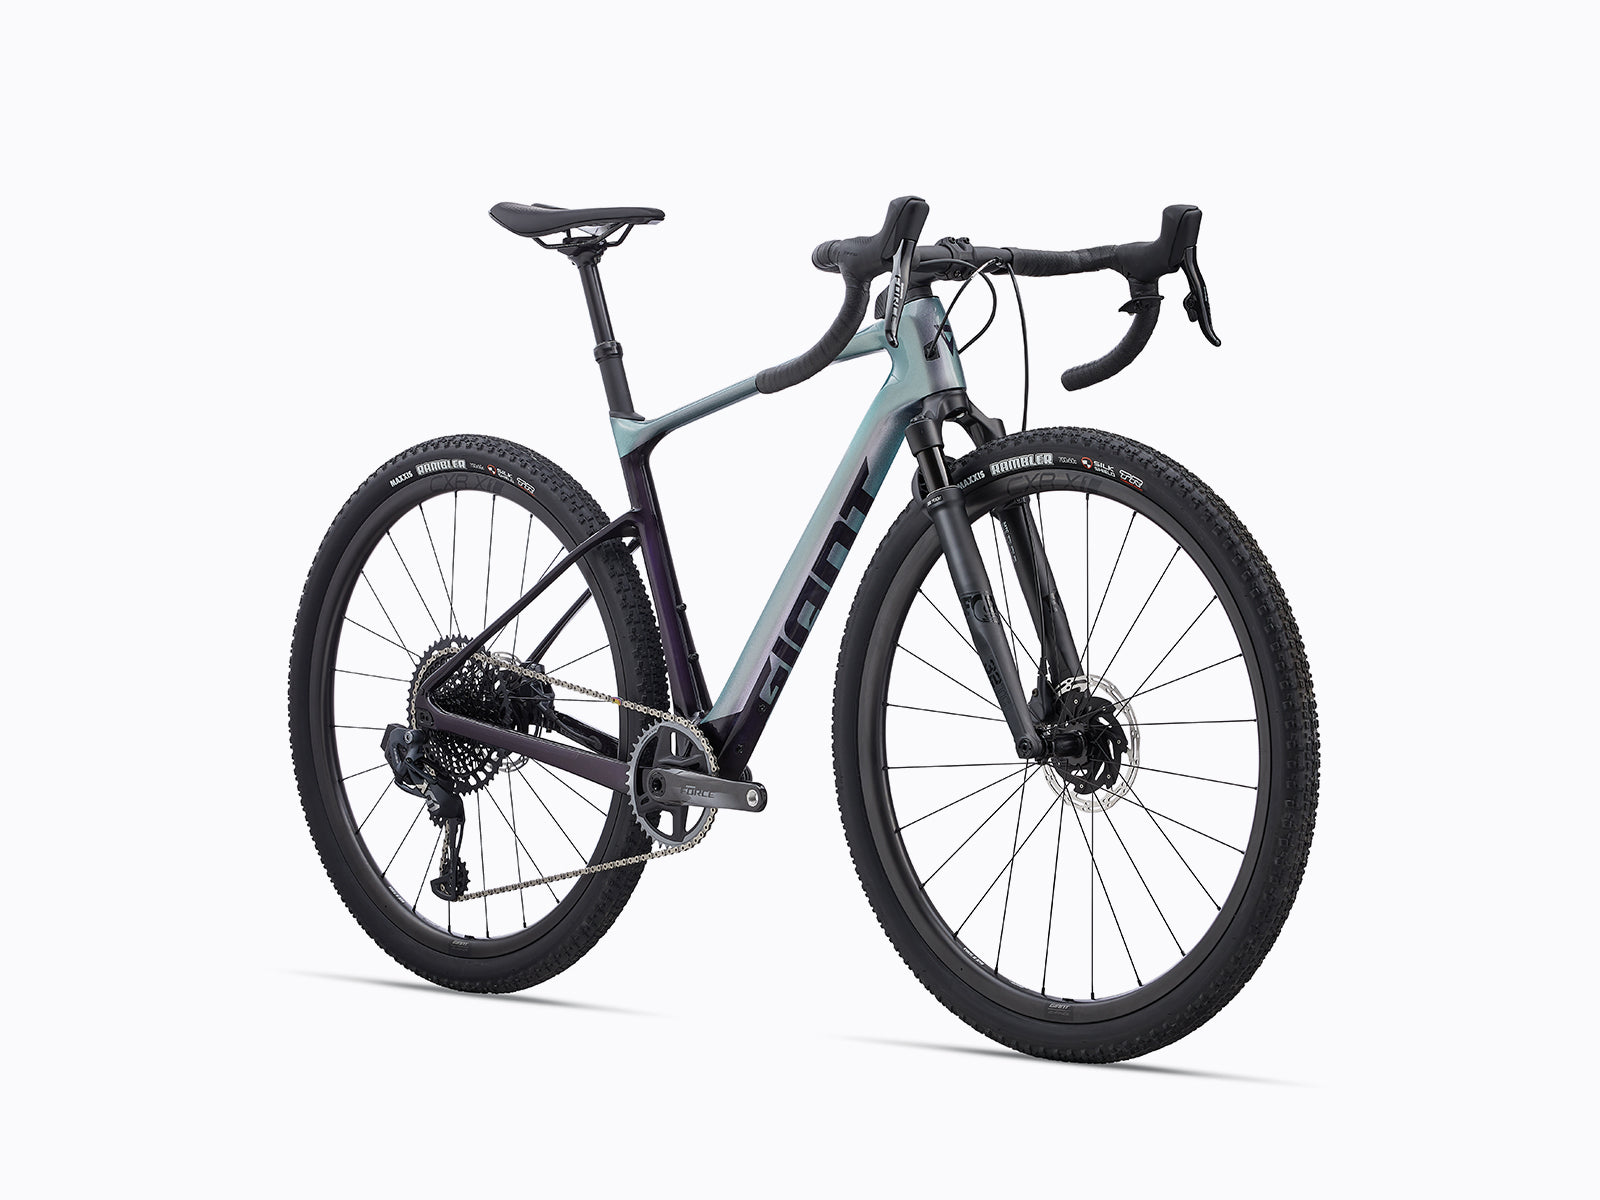 image features a giant revolt advanced pro 0, a gravel bike sold by Giant Melbourne, giant bicycles Australia